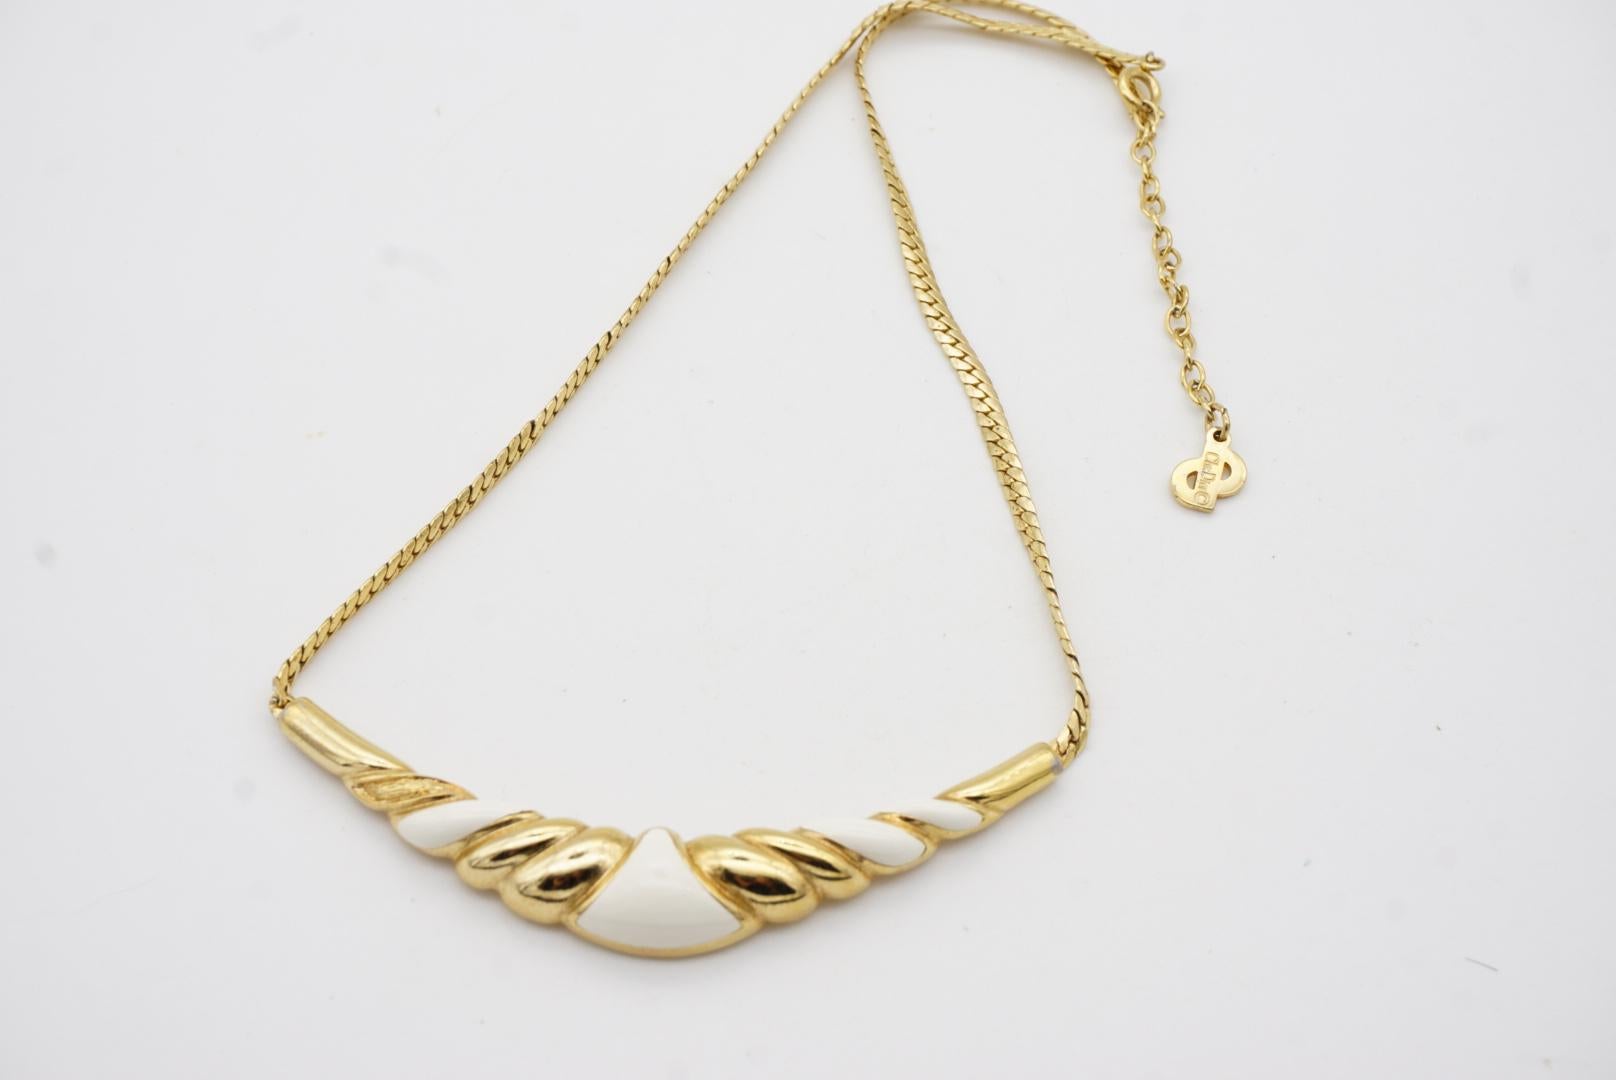 Christian Dior Vintage 1970s White Crescent Moon Triangle Long Pendant Necklace For Sale 4